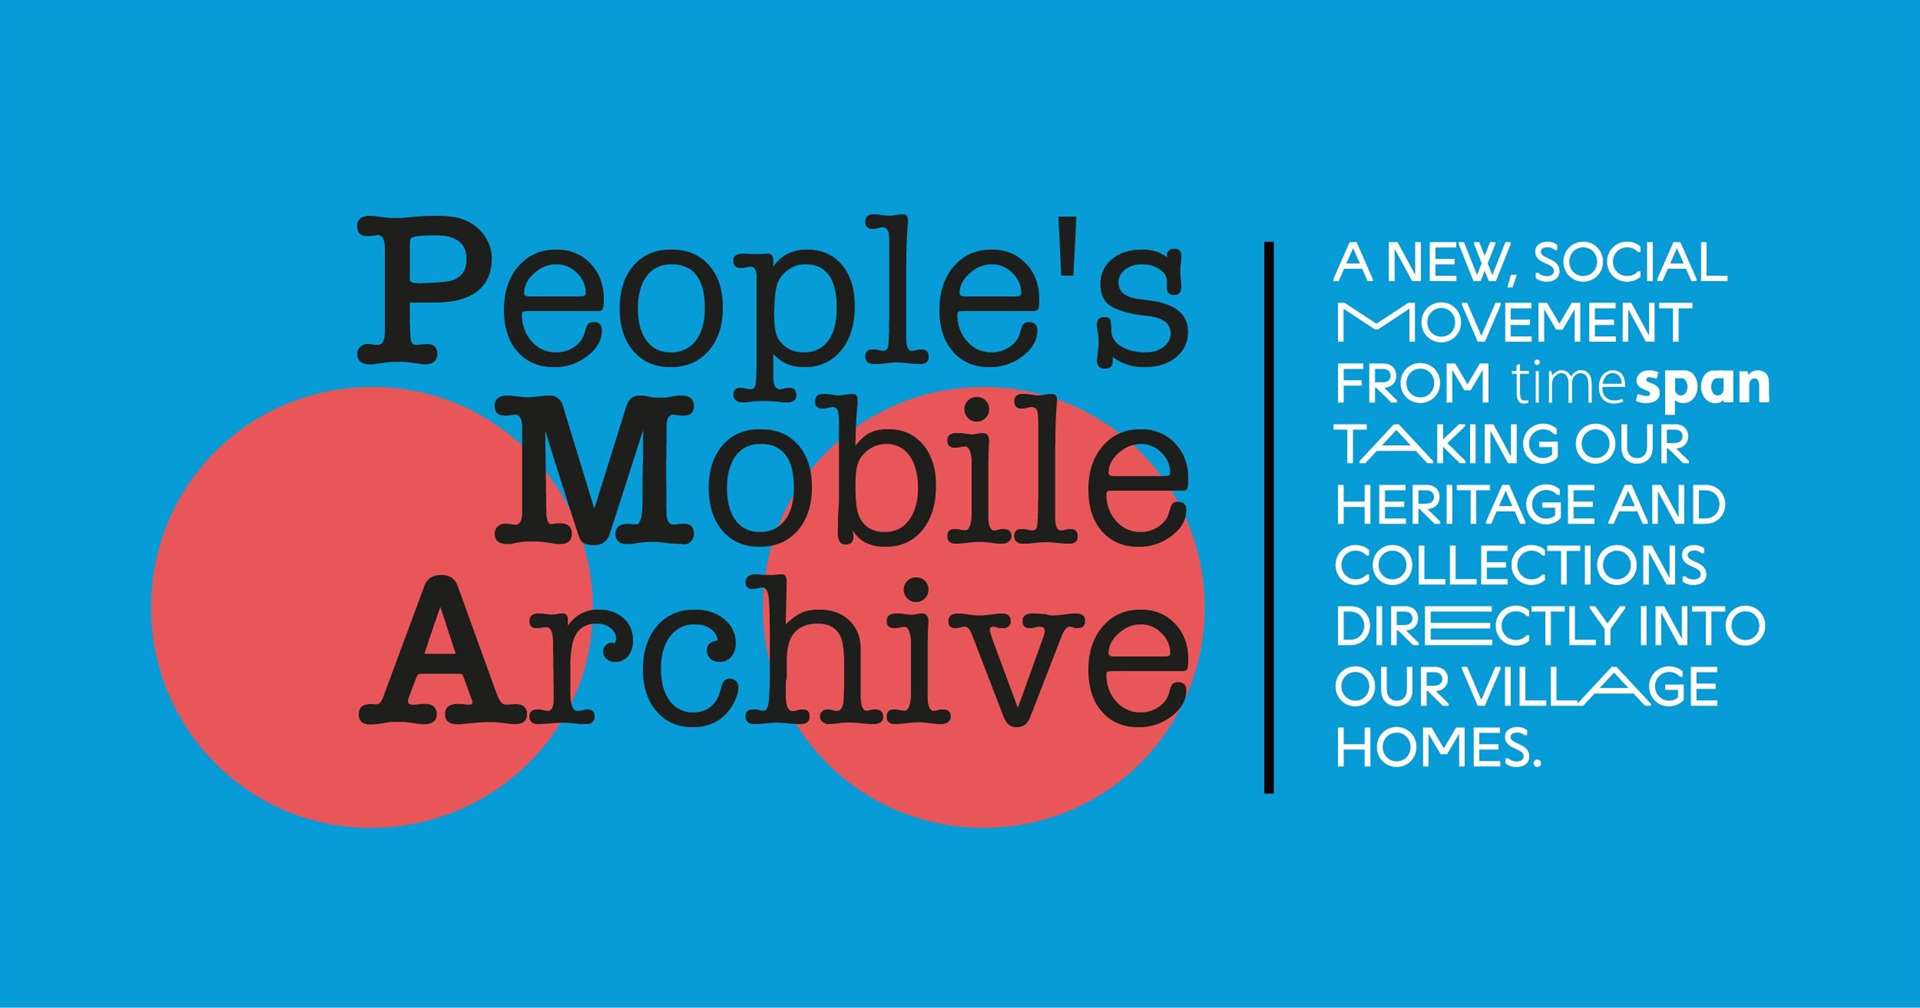 People's Mobile Archive (PMA) is a social movement which takes our heritage and collection of over 11,000 items, including local research and photographs, sound and film, heritage activity packs and lending library, directly into our village homes, and is available to visitors and groups in Timespan’s public archive.